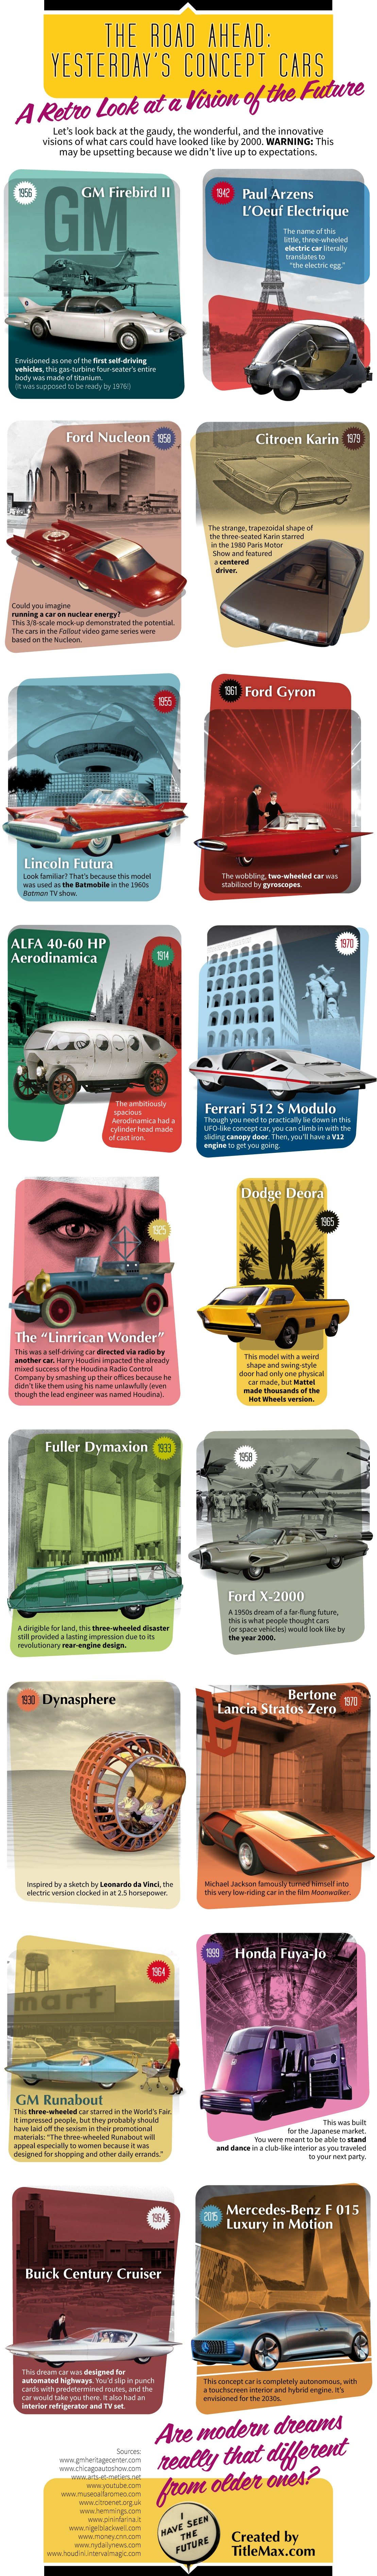 The Road Ahead: Yesterday’s Concept Cars – TitleMax.com – Infographic